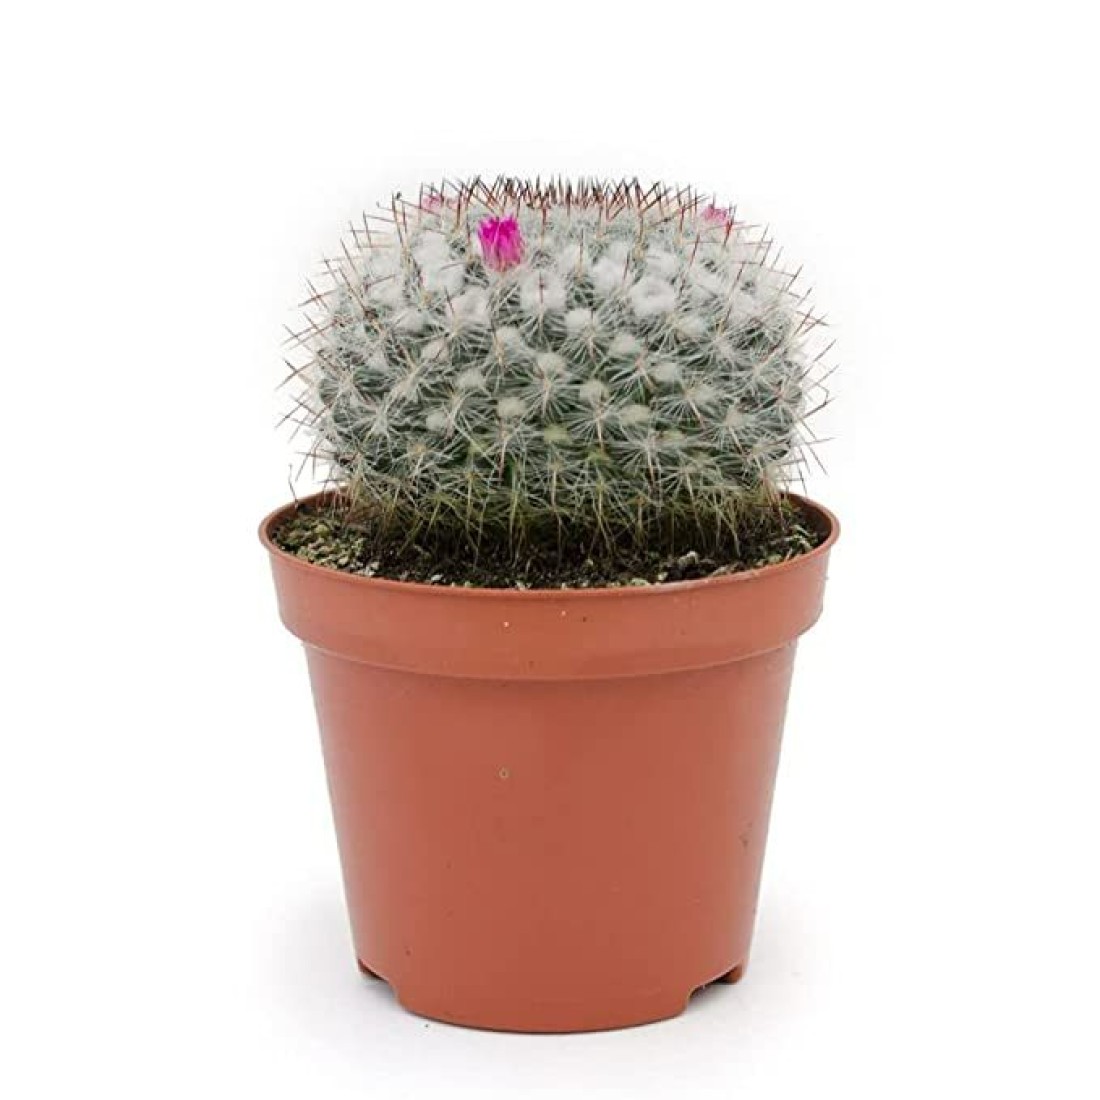 Mammillaria hahniana cactus live plant ( size 3 inches) flowering size 2